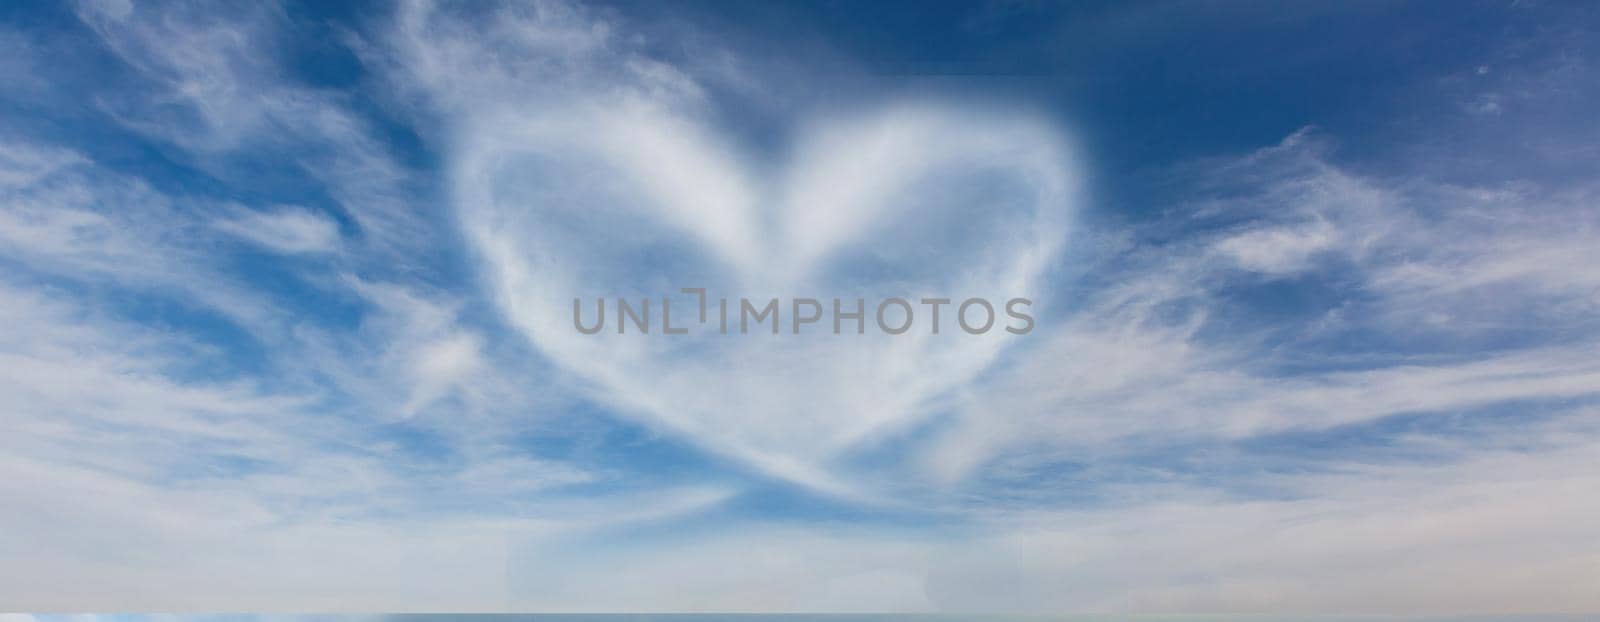 A cloud in the form of a heart. A figure from the clouds in the sky. Beautiful sky. Love. Imagination. Valentine's Day. Lovers. Fluffy cumulus cloud looks like a heart. Valentine's day symbol by Andelov13